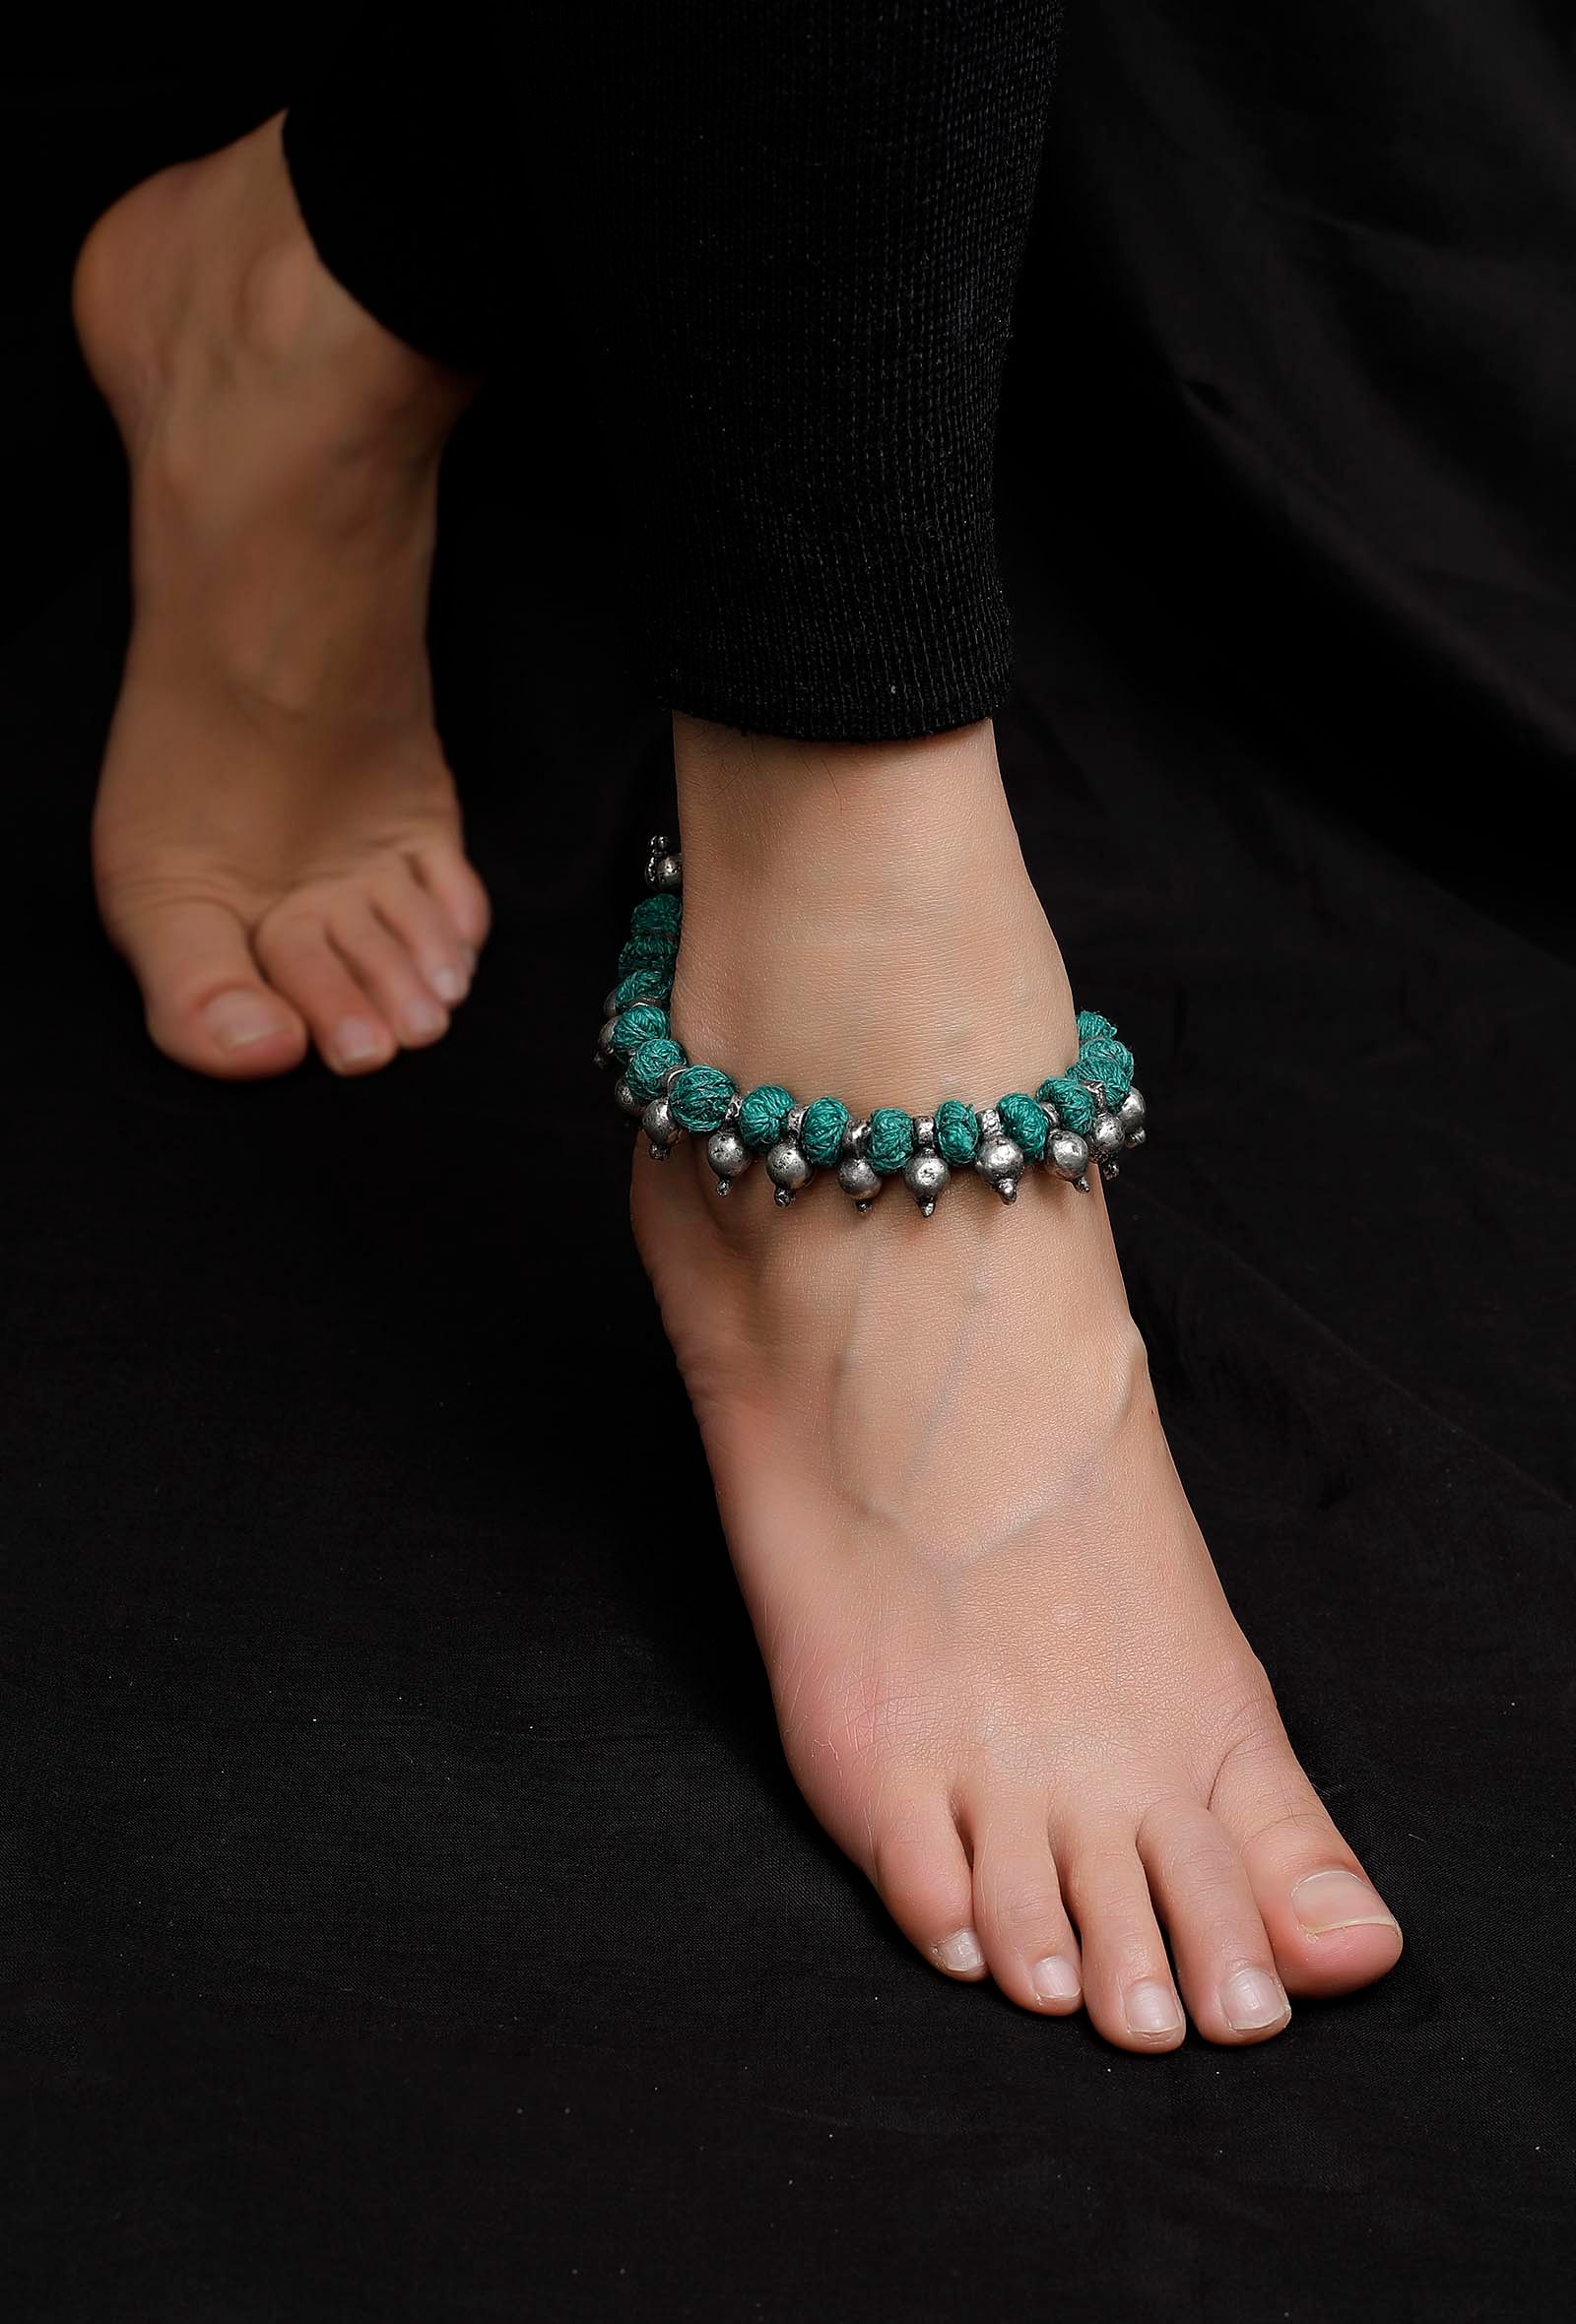 Set of 2: Teal with Silver Beads Tribal Anklet